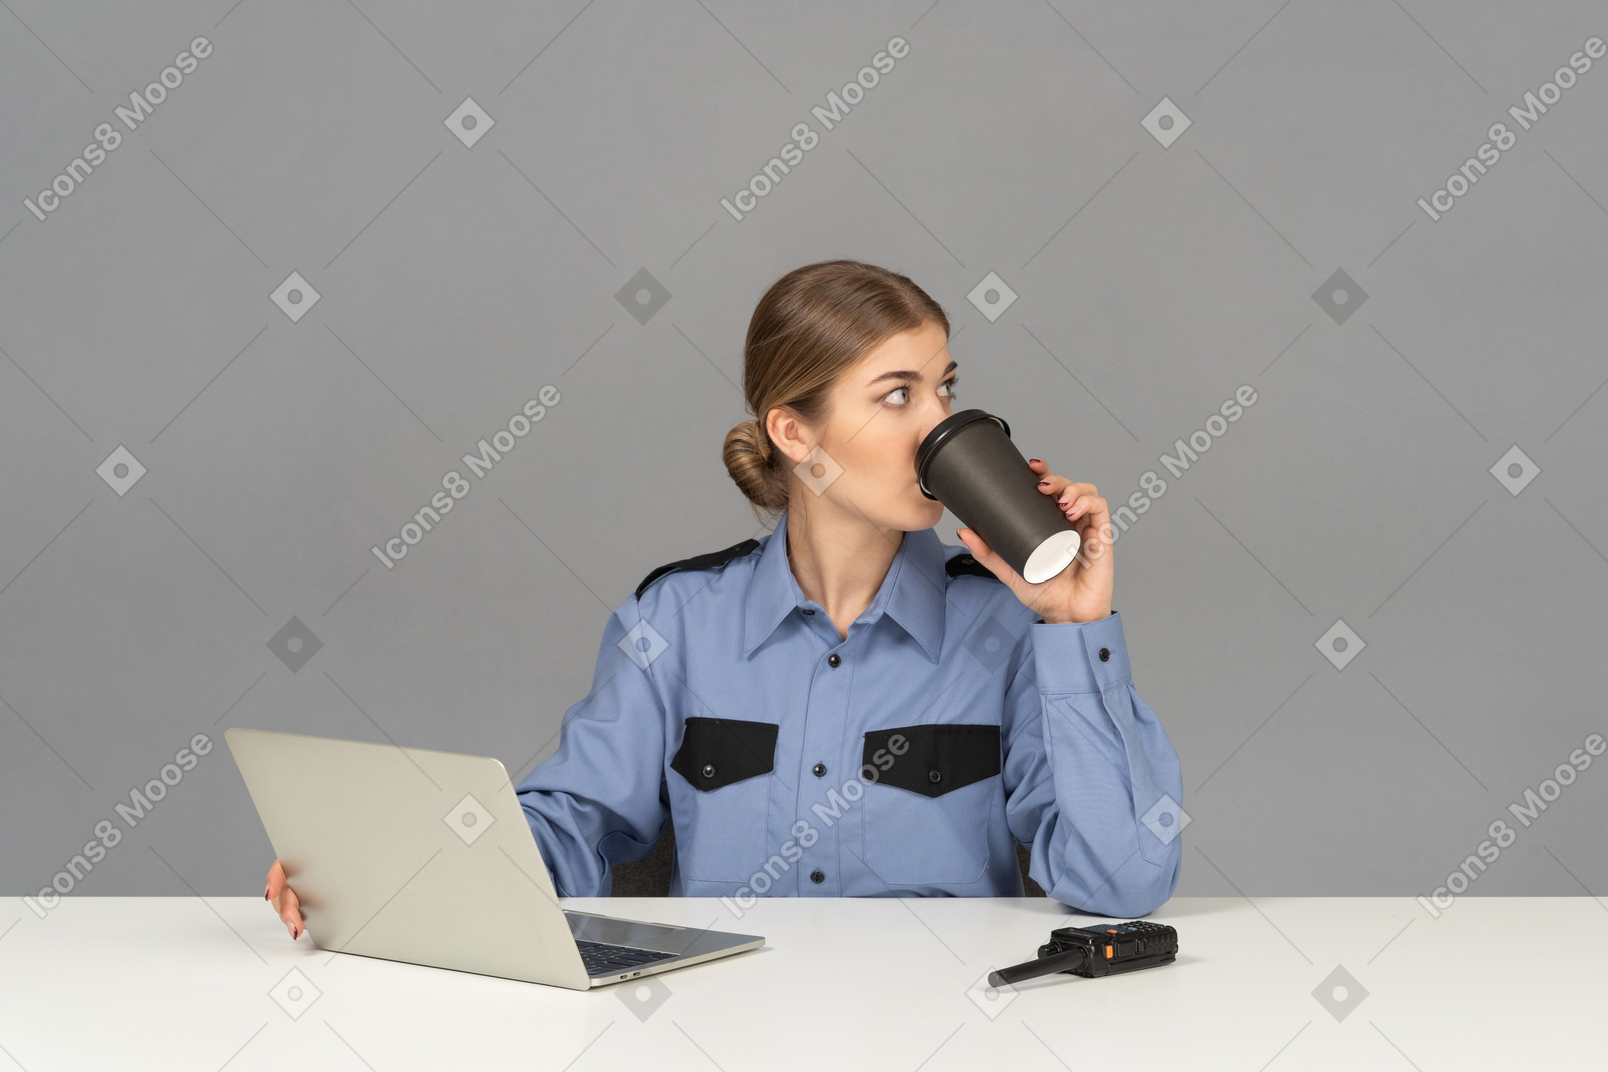 A female security guard drinking a coffee